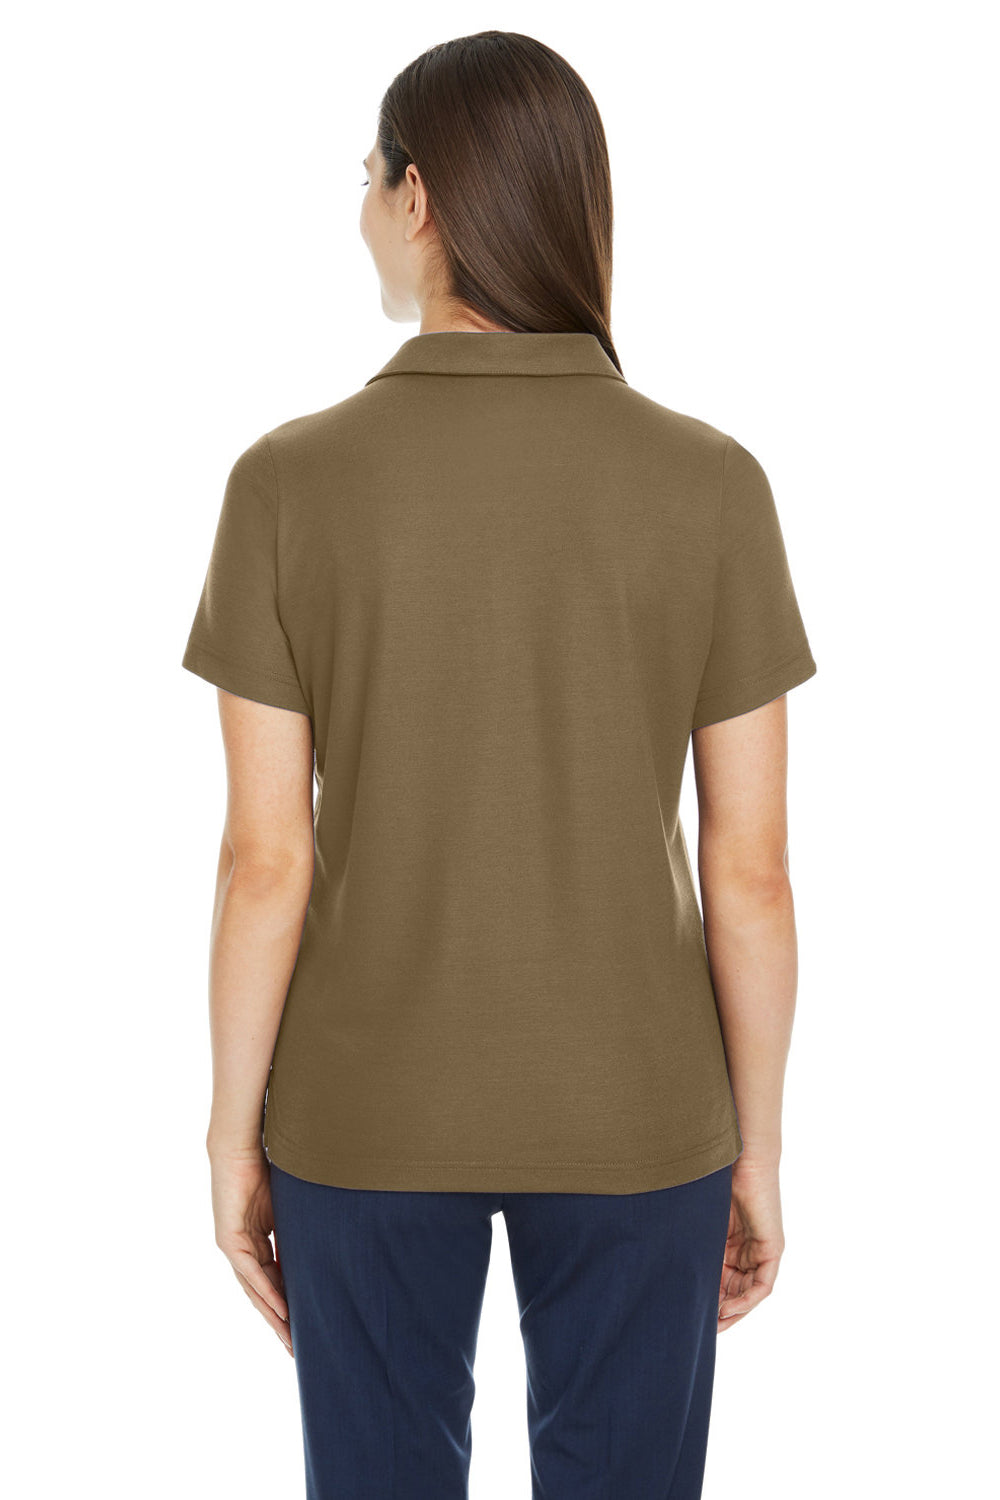 Core 365 CE112W Womens Fusion ChromaSoft Performance Moisture Wicking Pique Short Sleeve Polo Shirt Coyote Brown Back